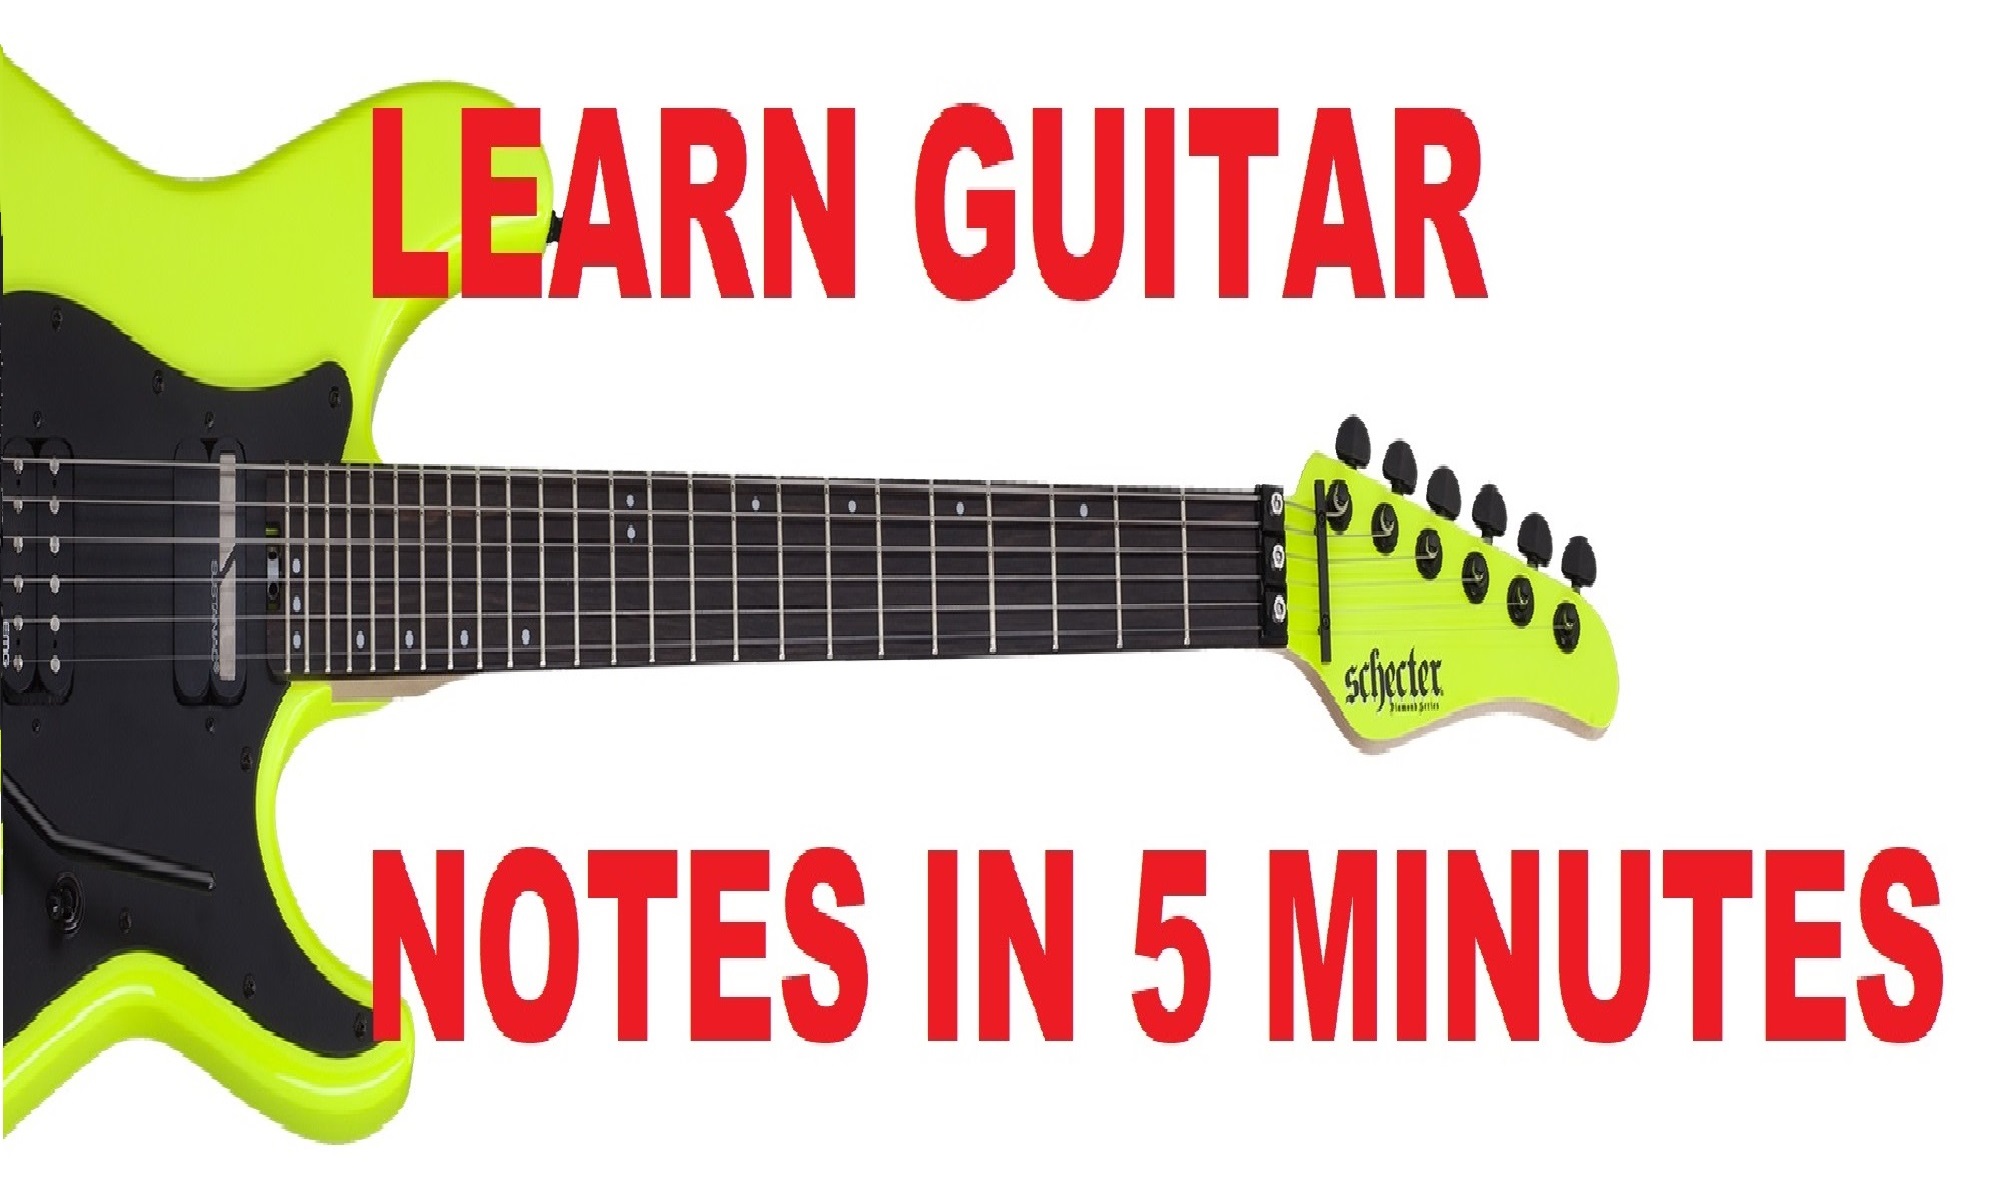 Learn Guitar Notes in 5 Minutes